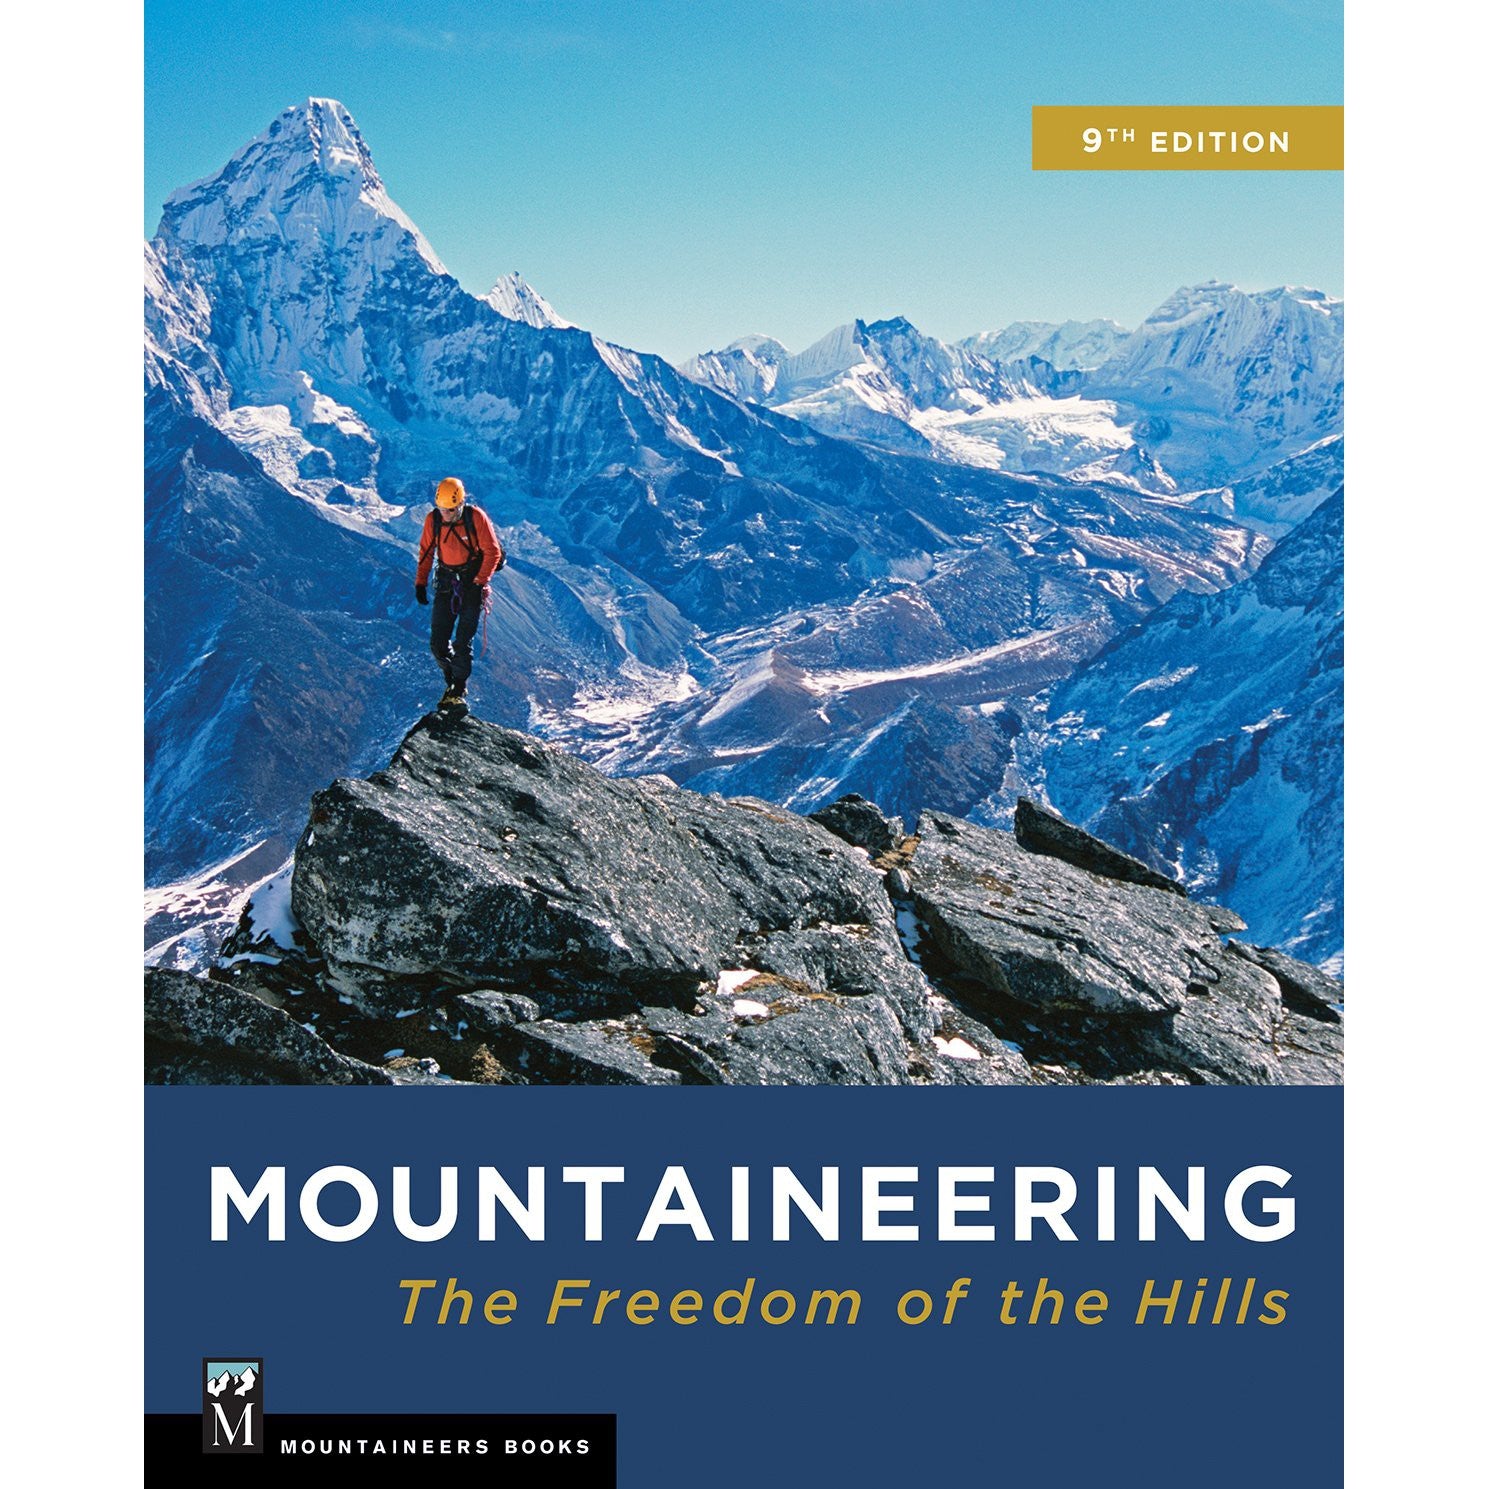 Mountaineering: The Freedom of the Hills: Freedom of the Hills, 9th Edition